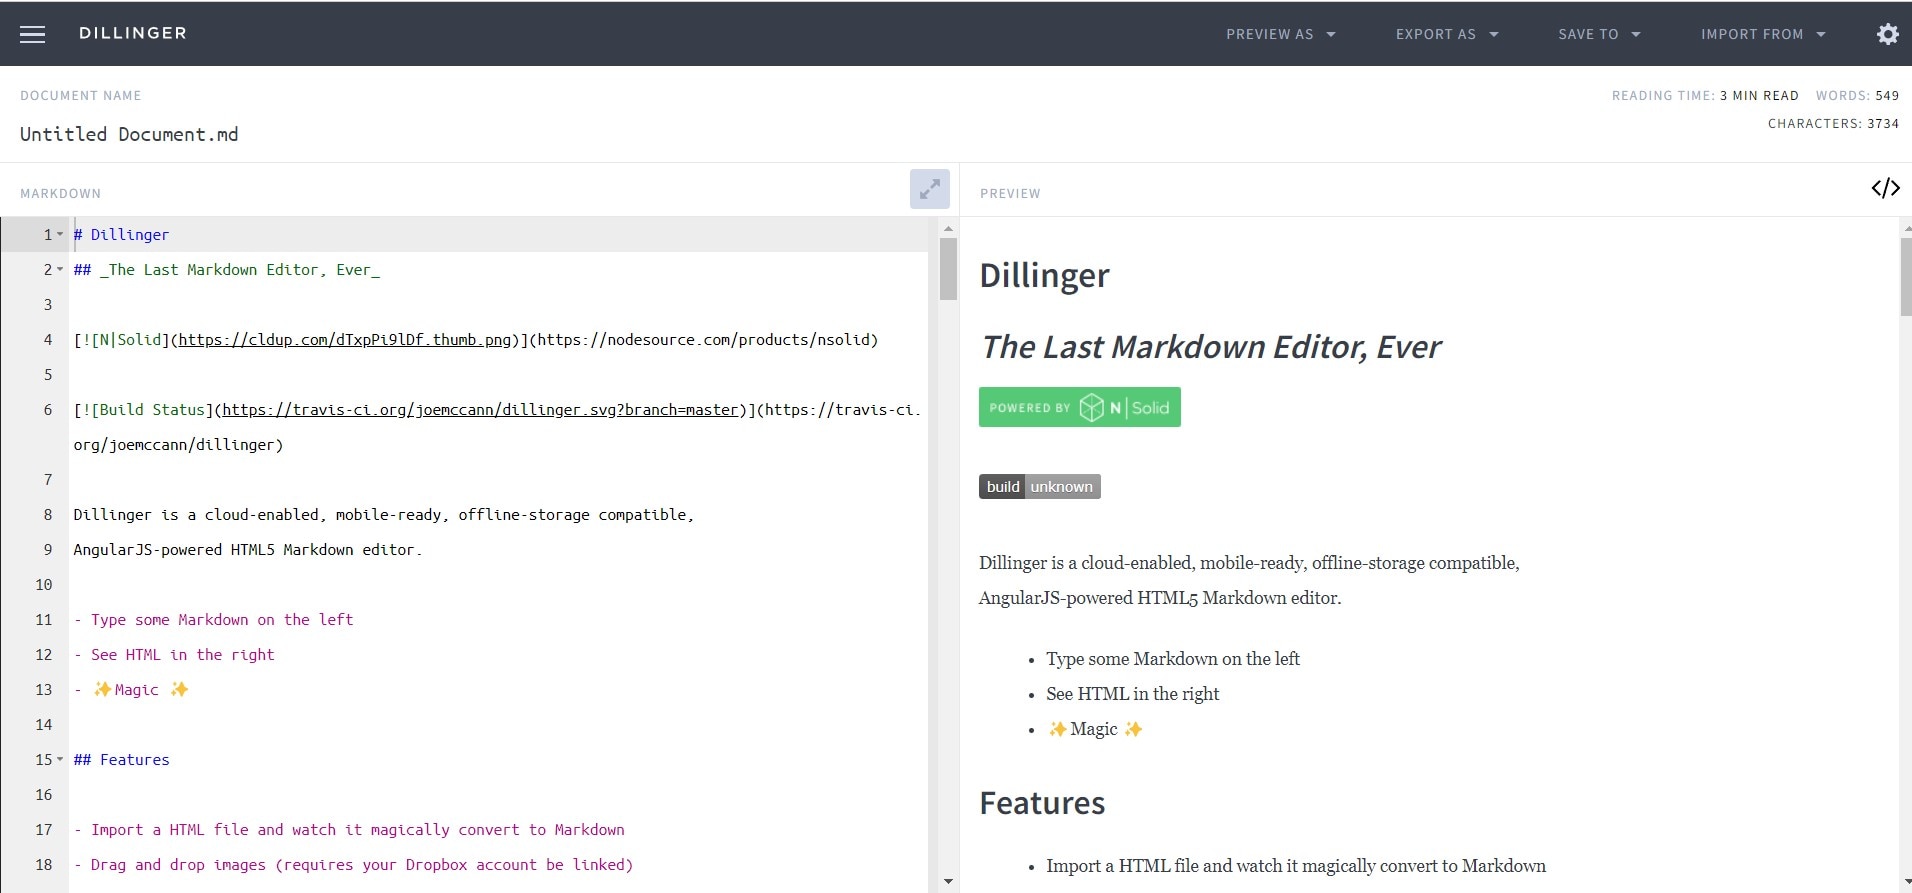 Dillinger web-based Markdown viewer designed for distraction-free writing.